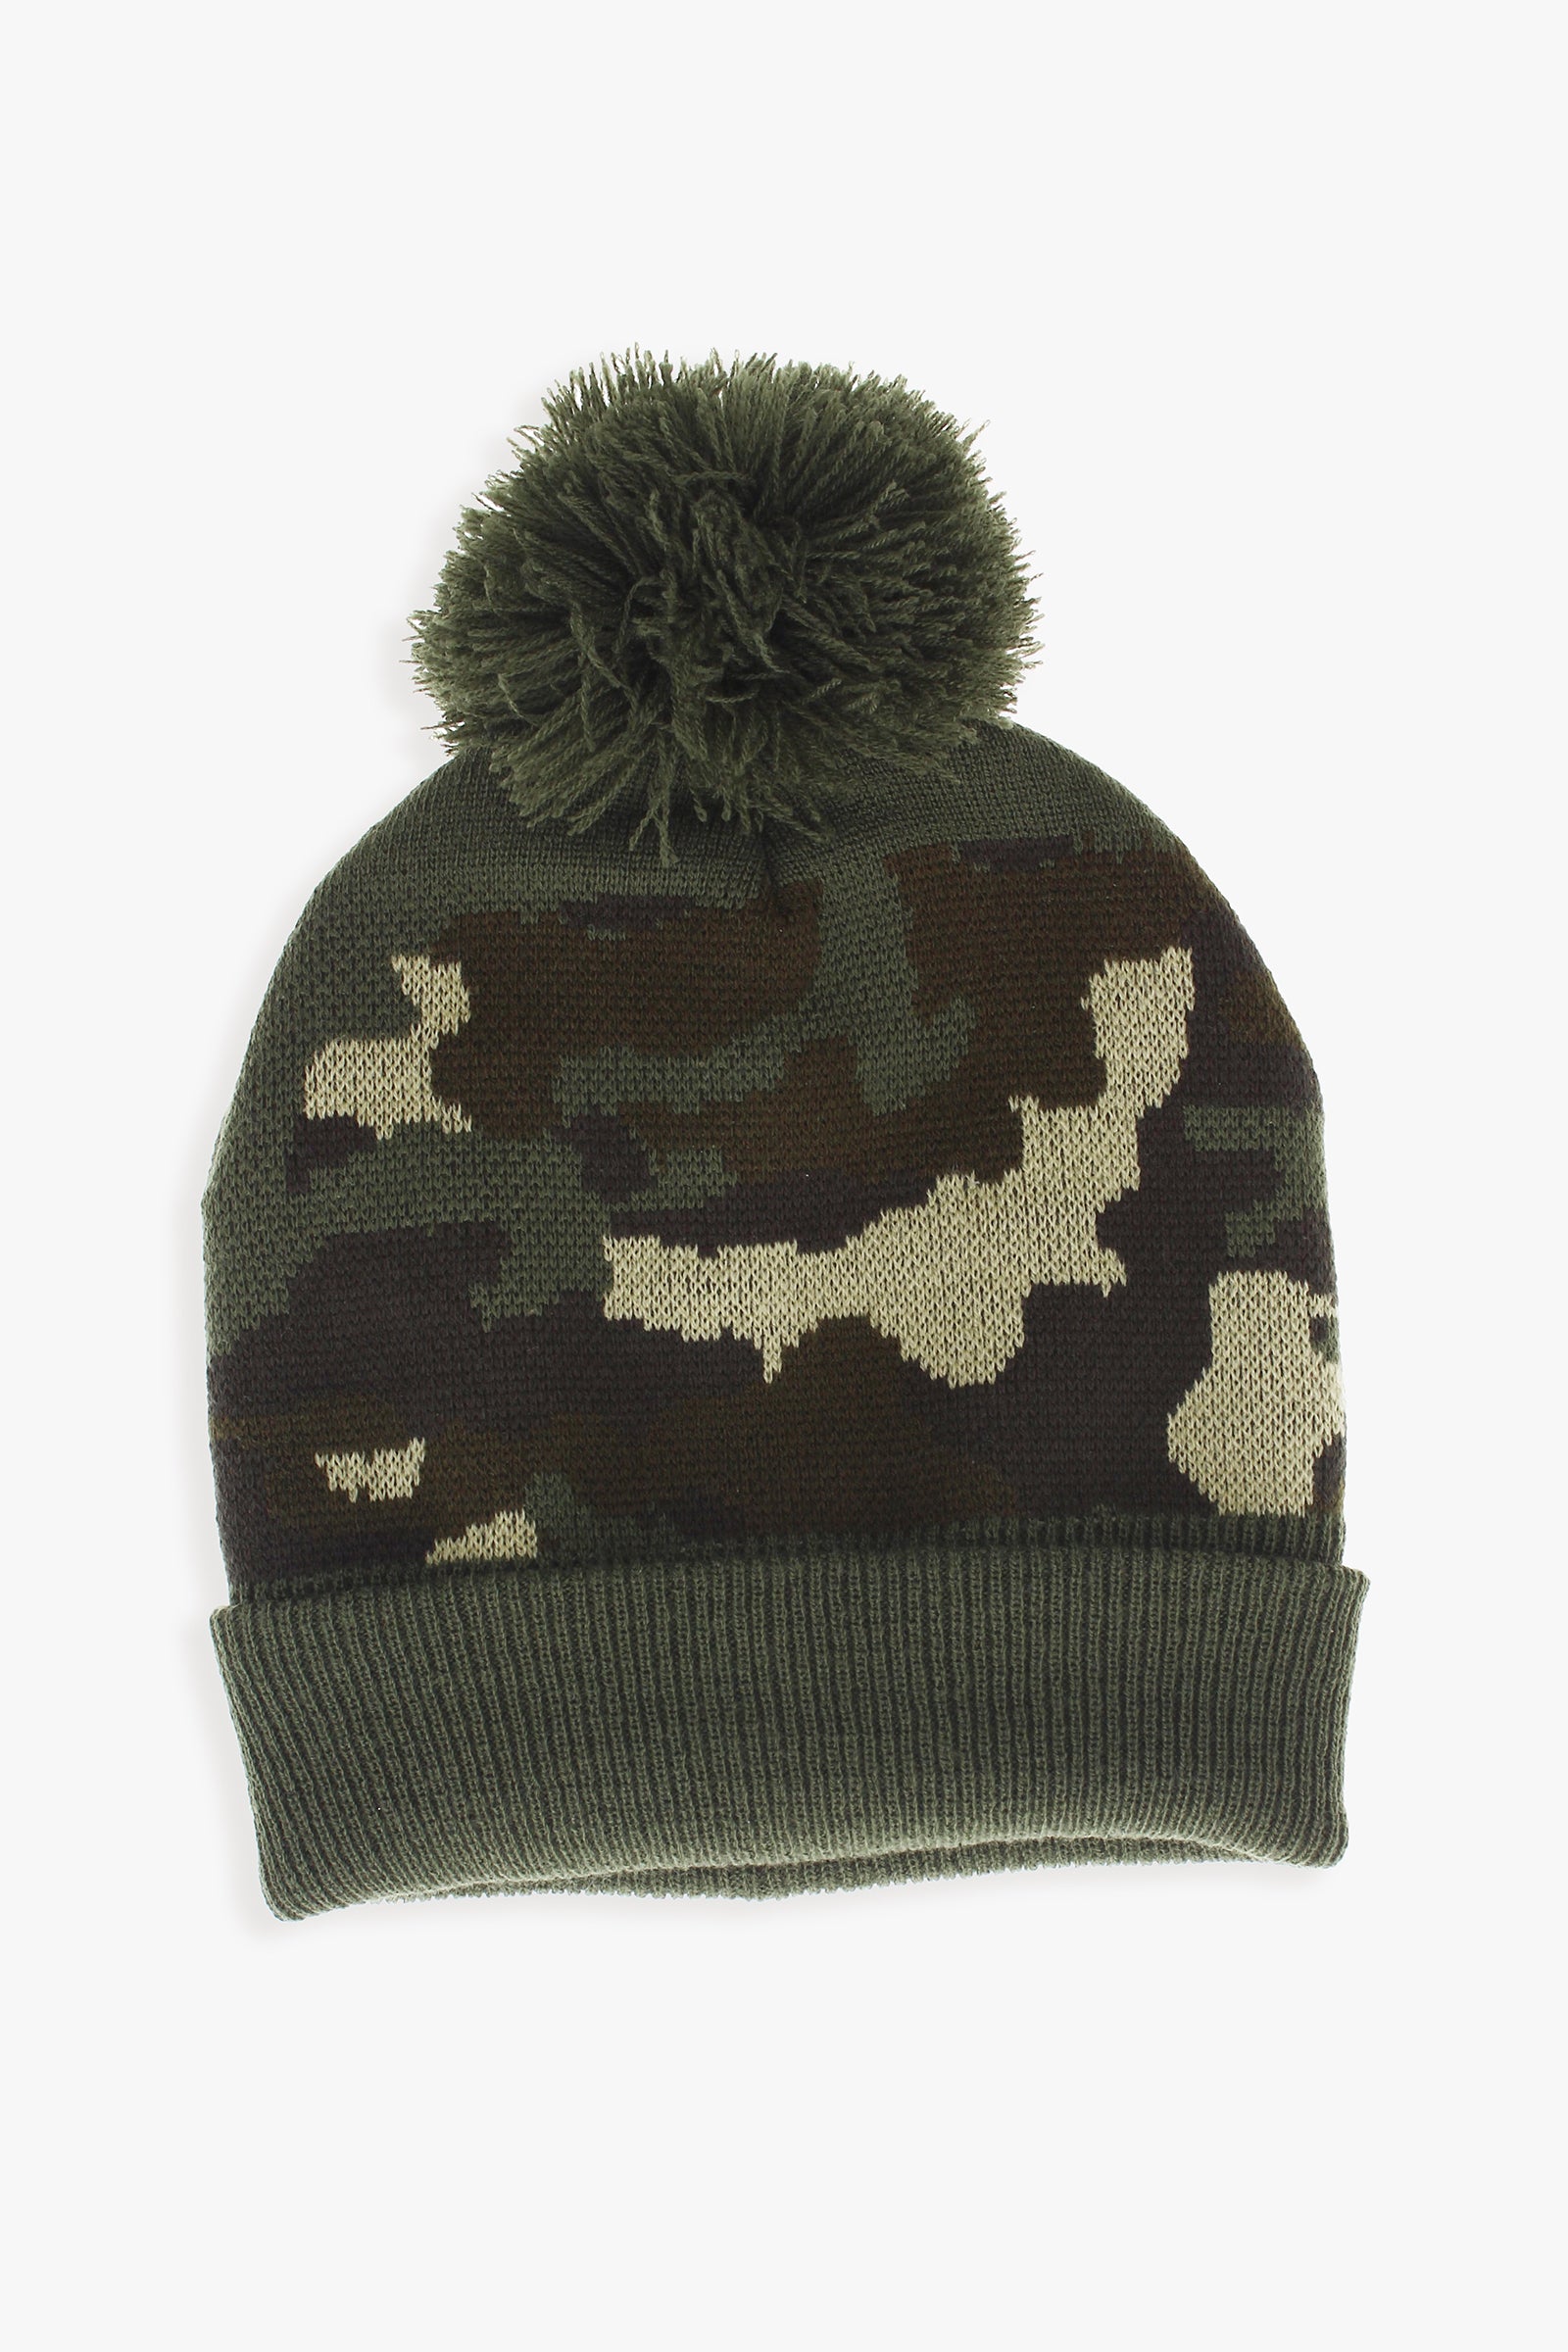 Great Northern Adult Unisex Camouflage Cuff Toque With Yarn Pom